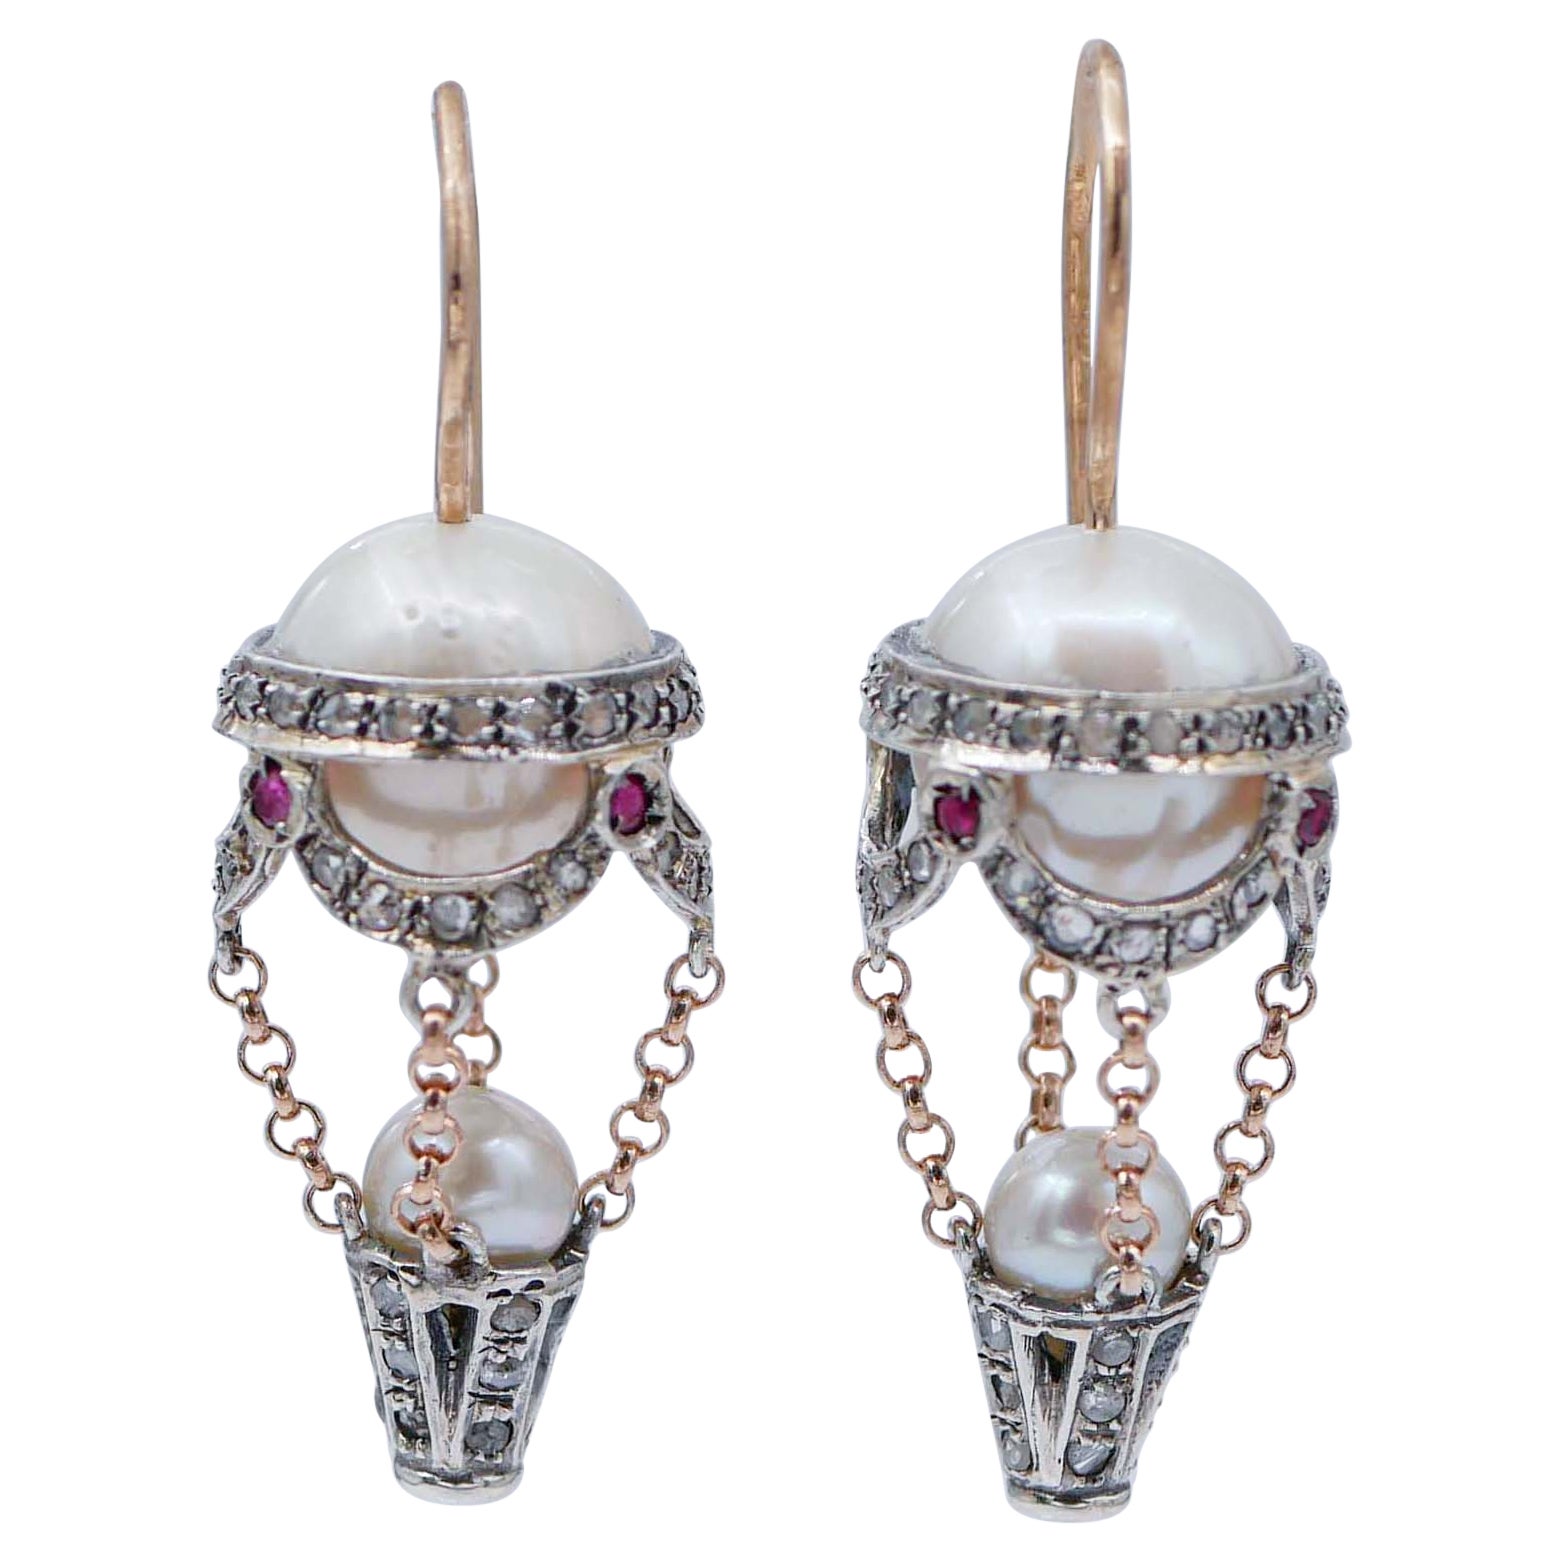 Pearls, Rubies, Diamonds, Rose Gold and Silver Hot Air Balloon Earrings For Sale